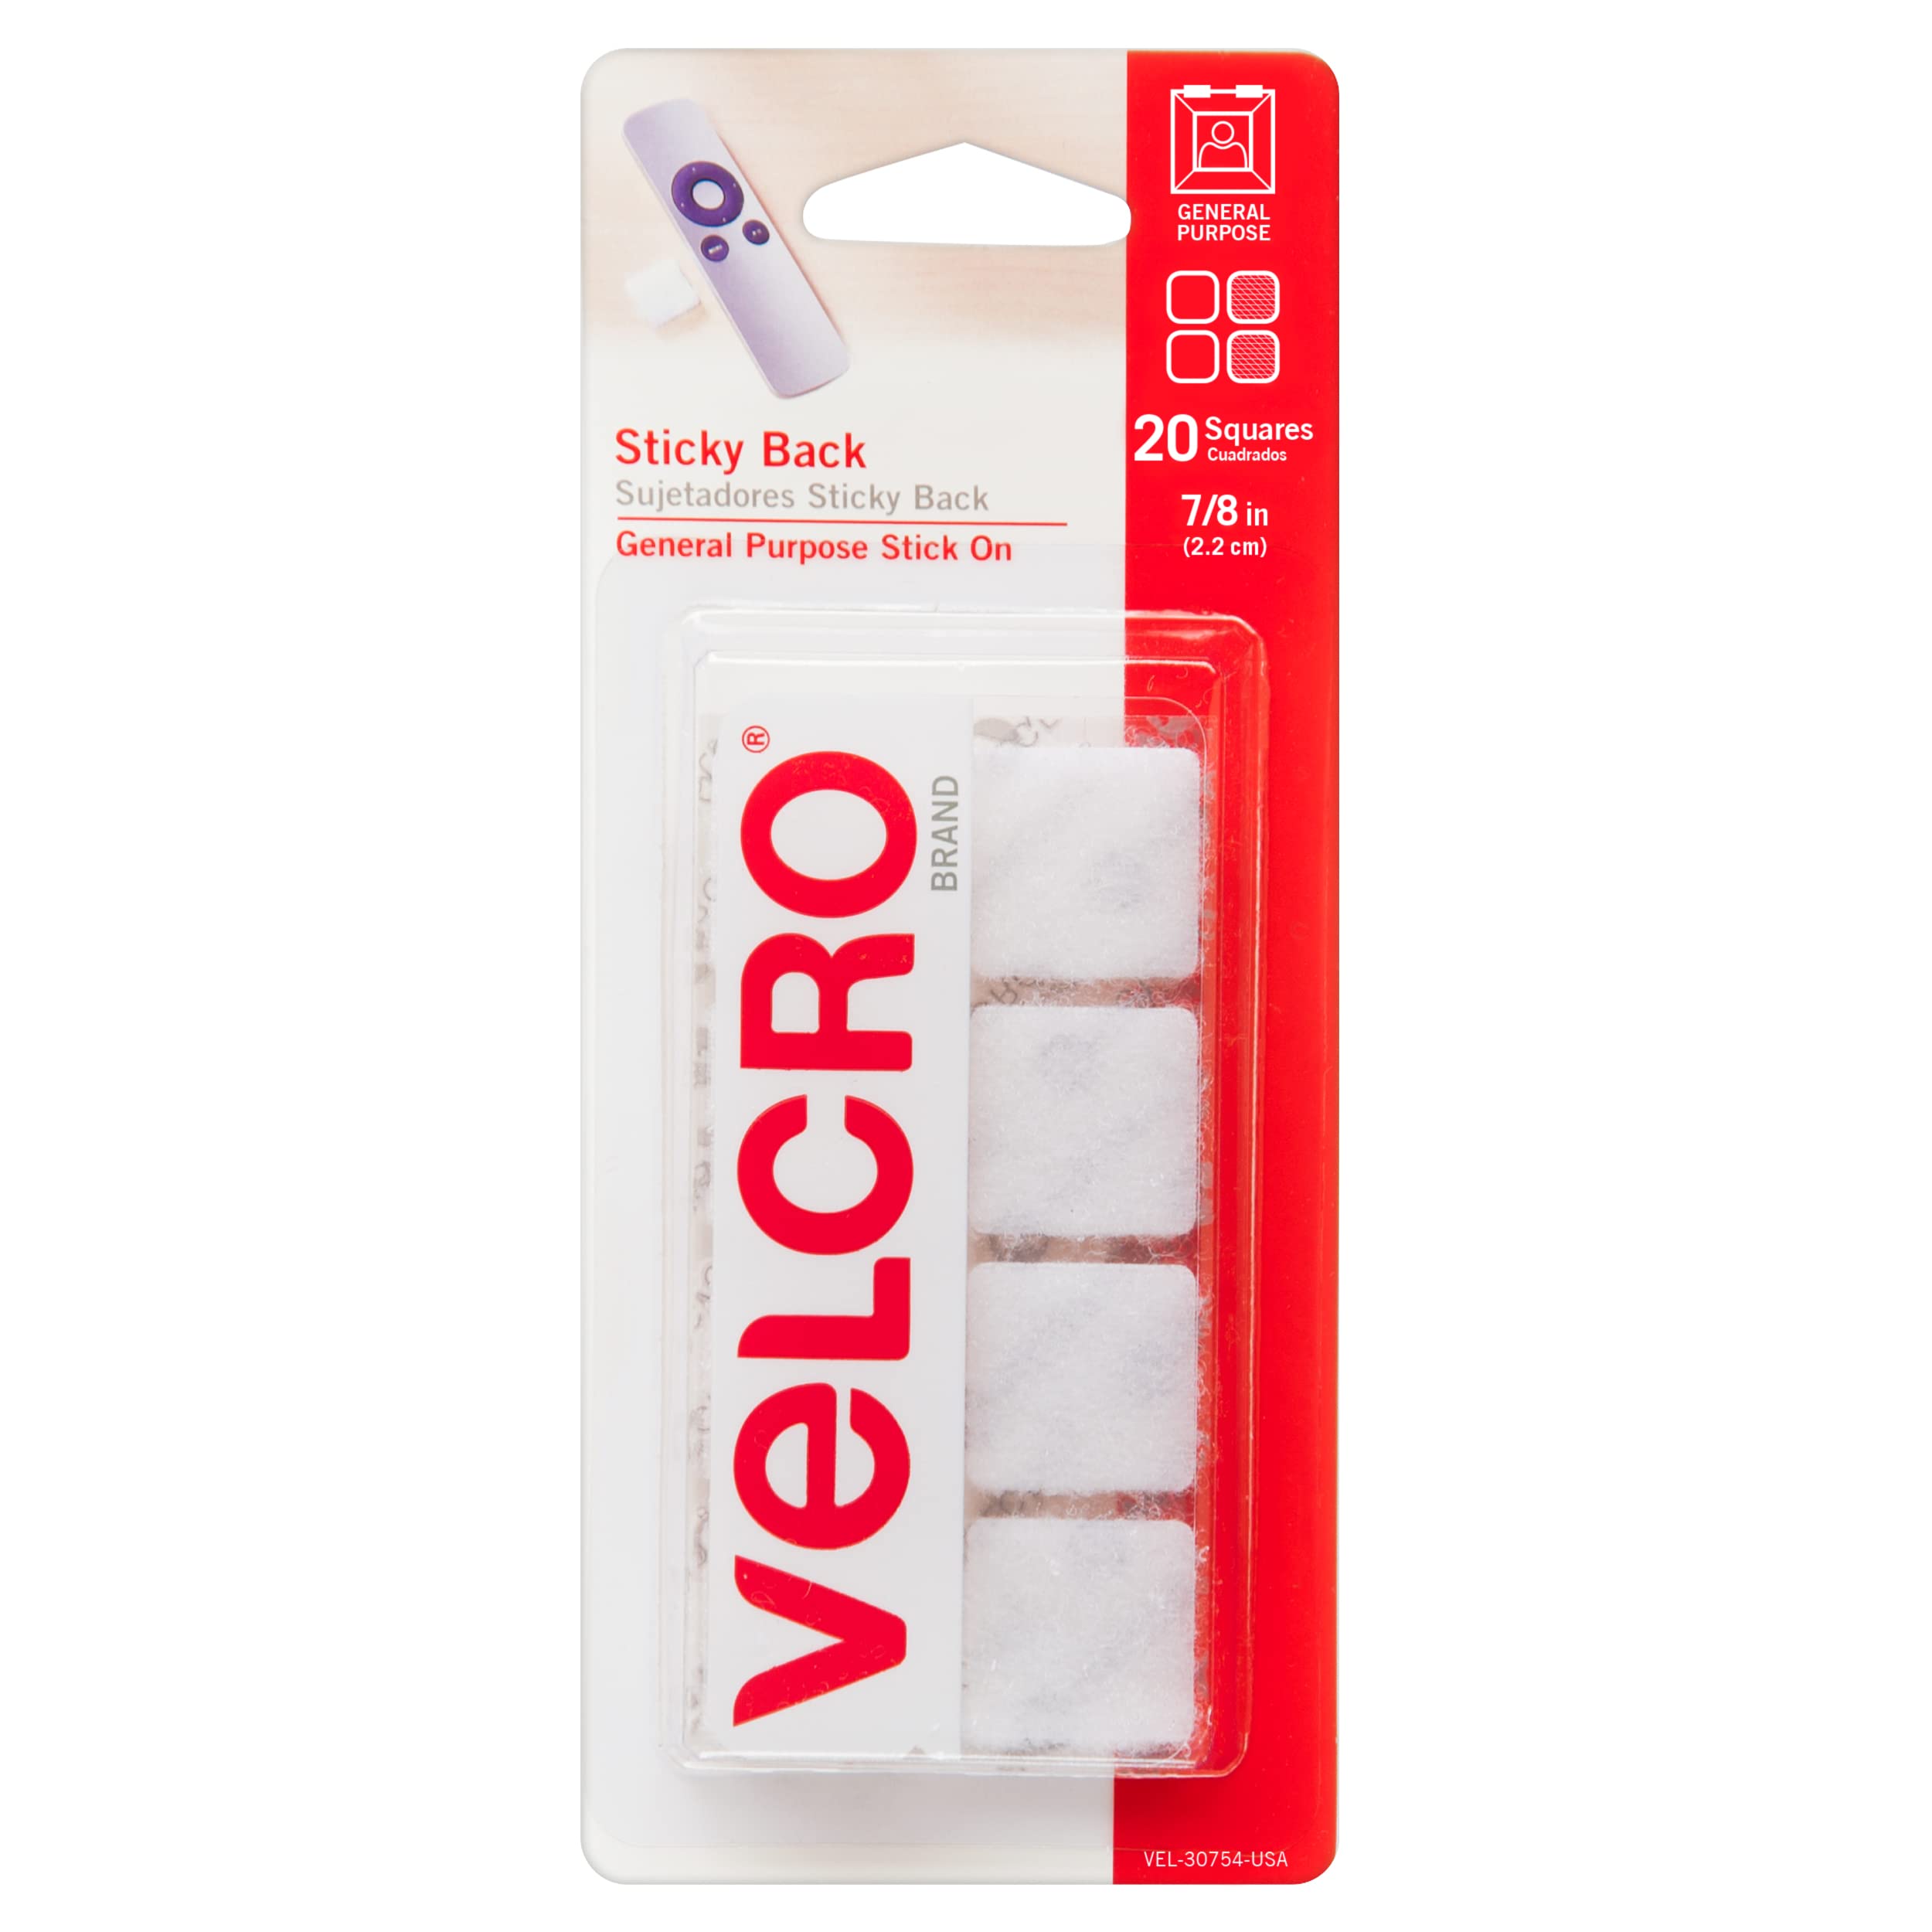 VELCRO Brand Mounting Squares, Pack of 20, 7/8 Inch White, Adhesive  Sticky Back Hook and Loop Fasteners for Home Office or Crafting